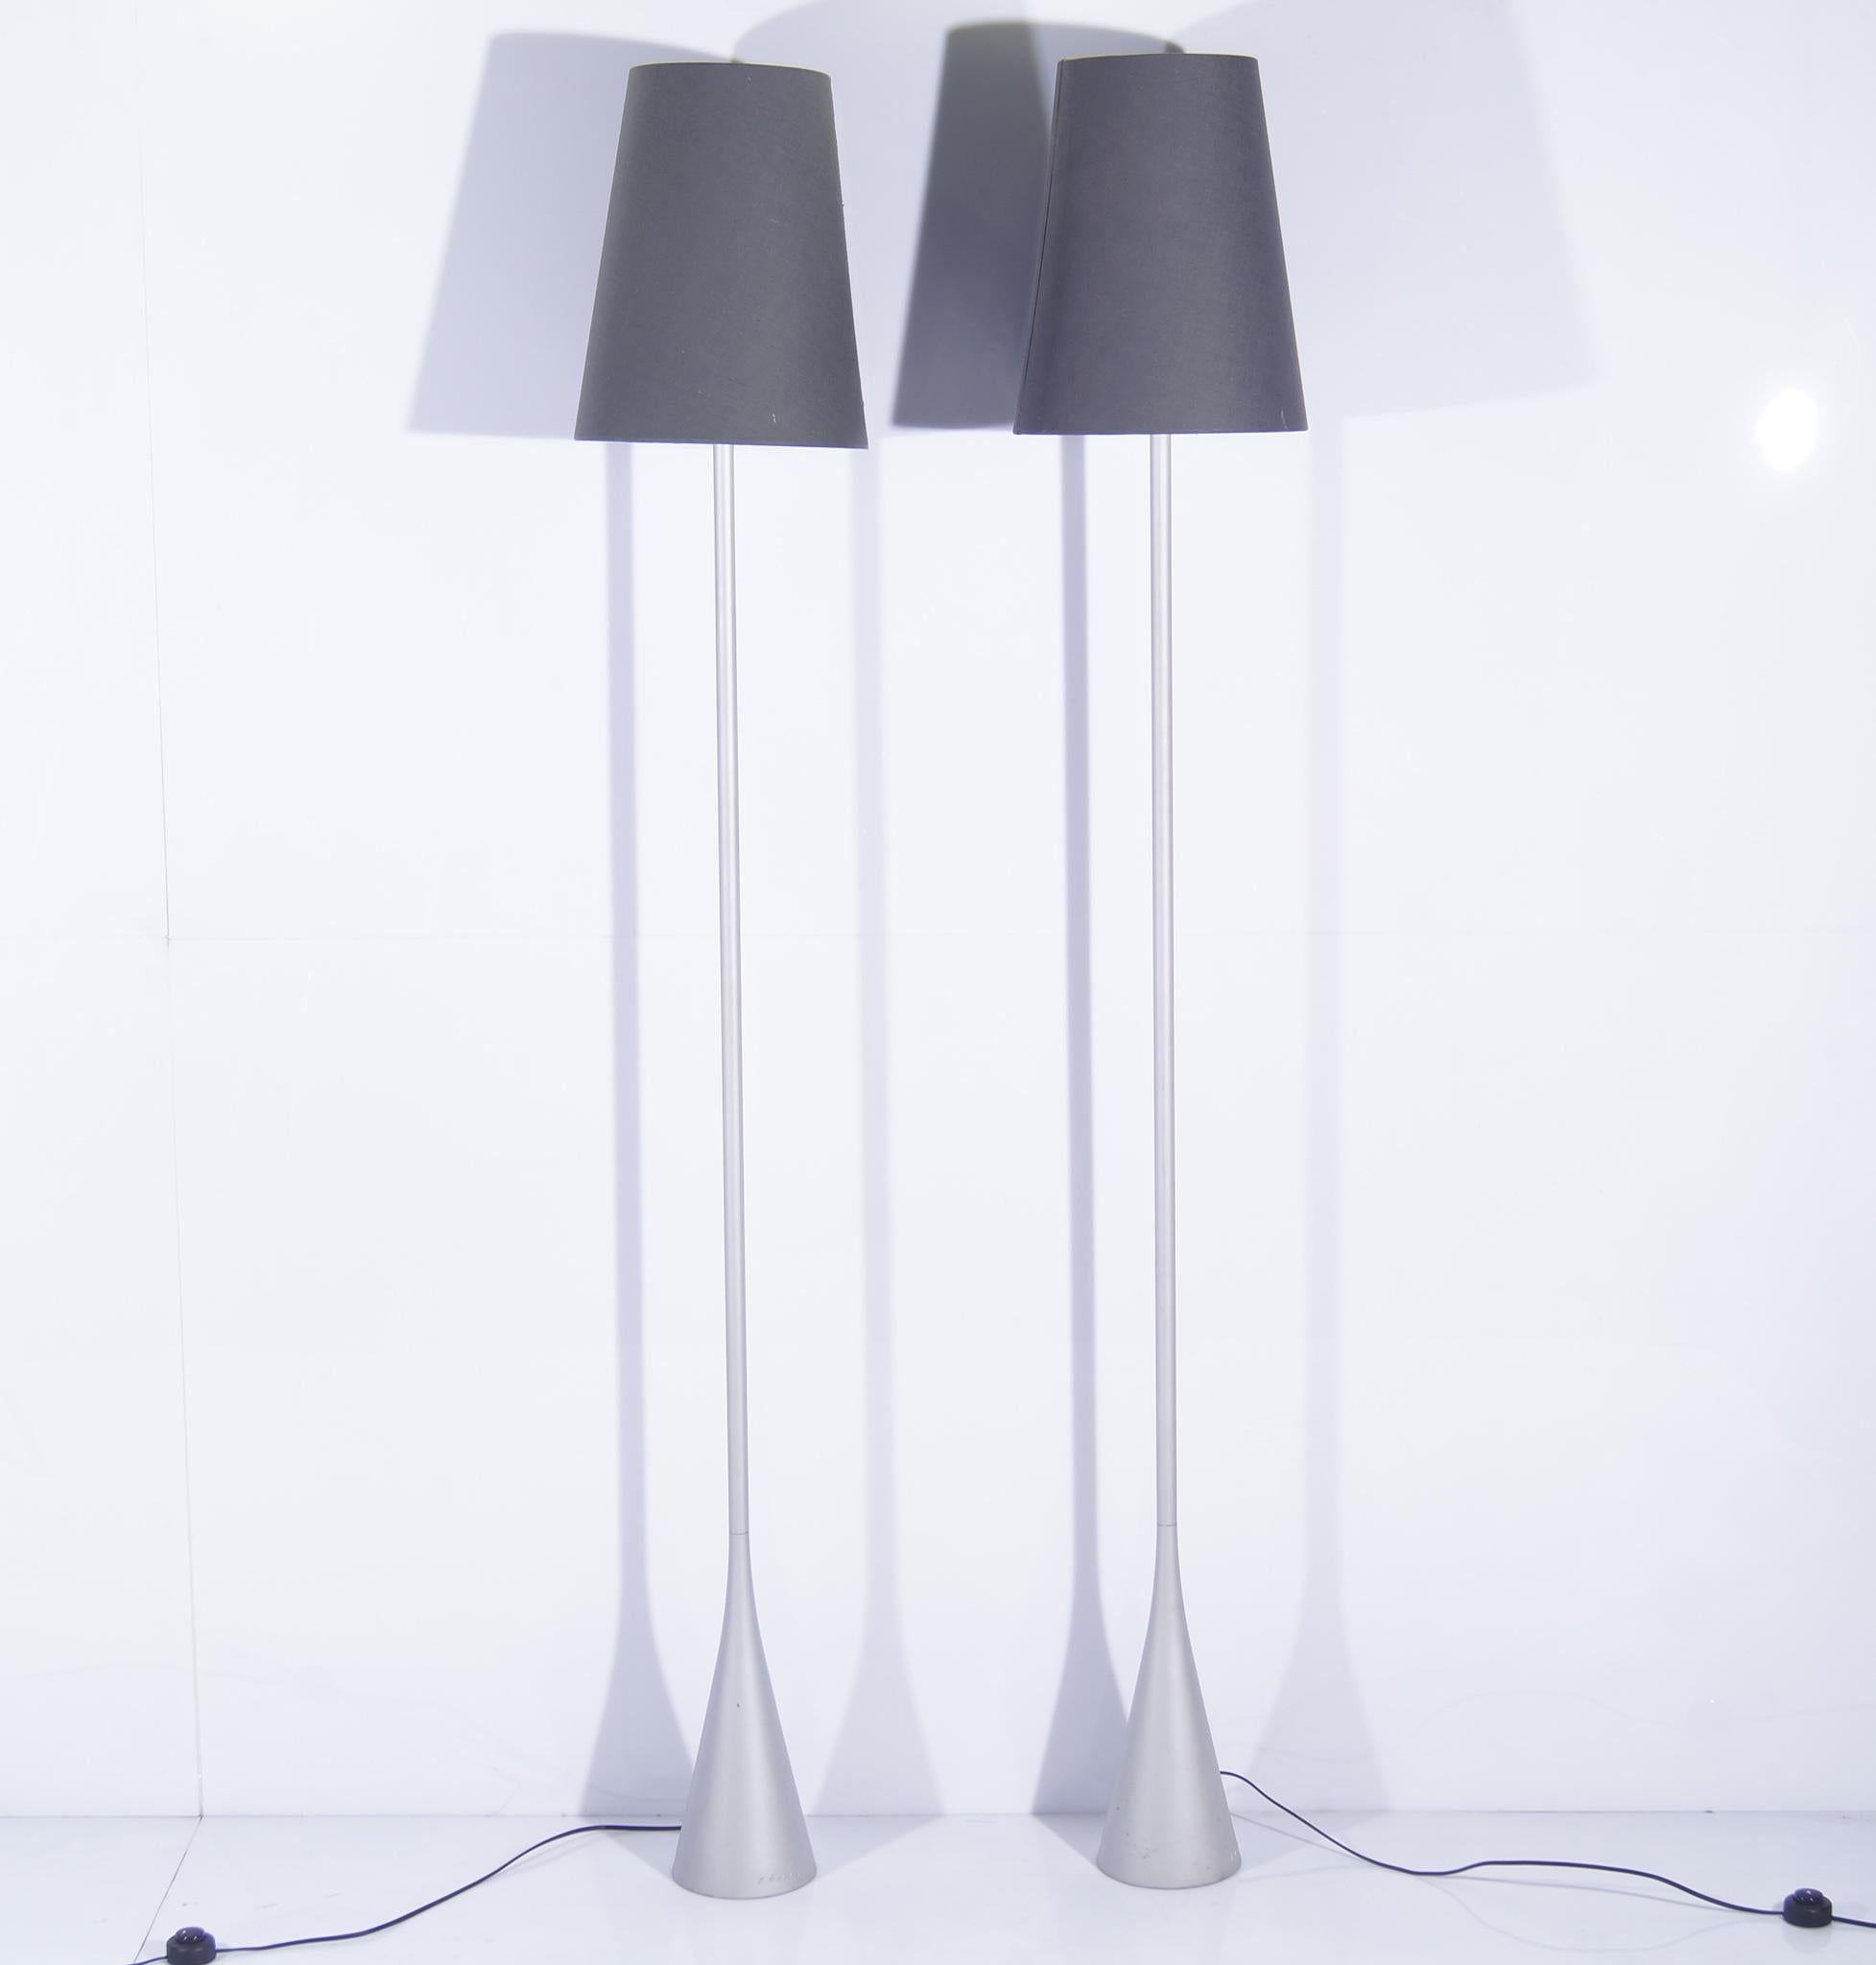 Metal Pascal Mourgue for Ligne Roset, Floorlamps, Set of 2